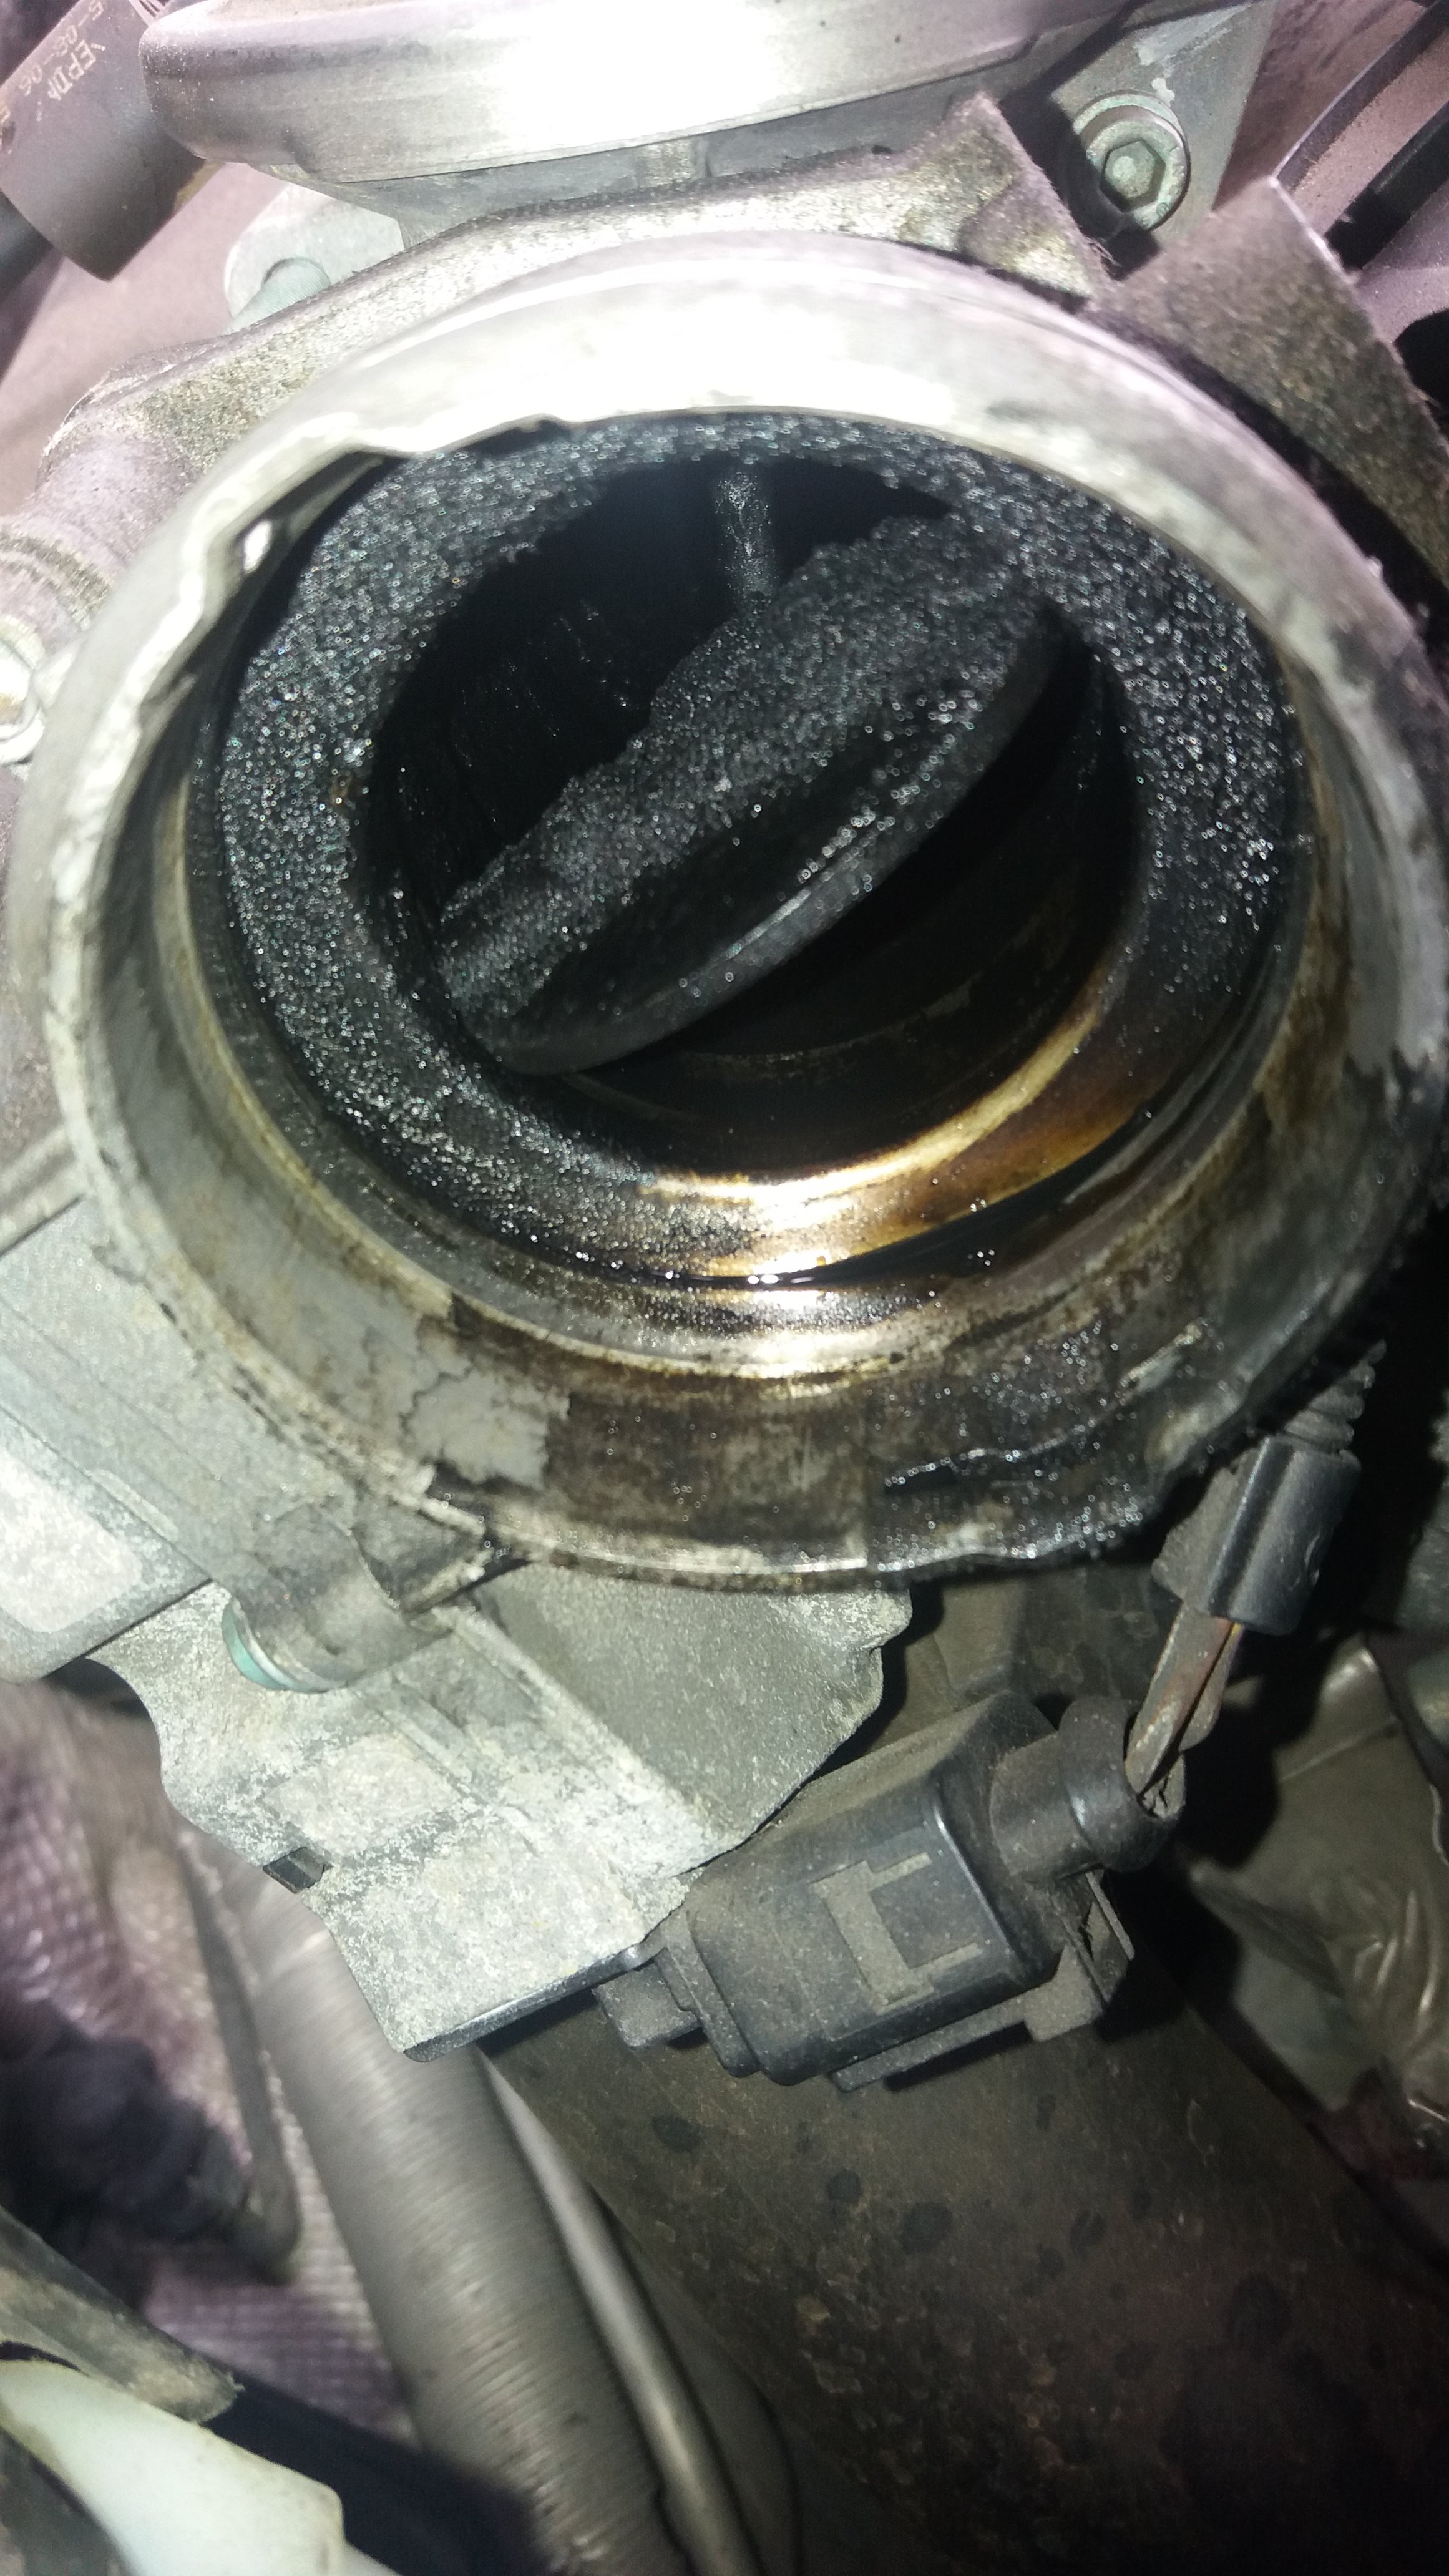 VW / Seat / Audi / Skoda 1.9tdi EGR valve cleaning (without removing) 